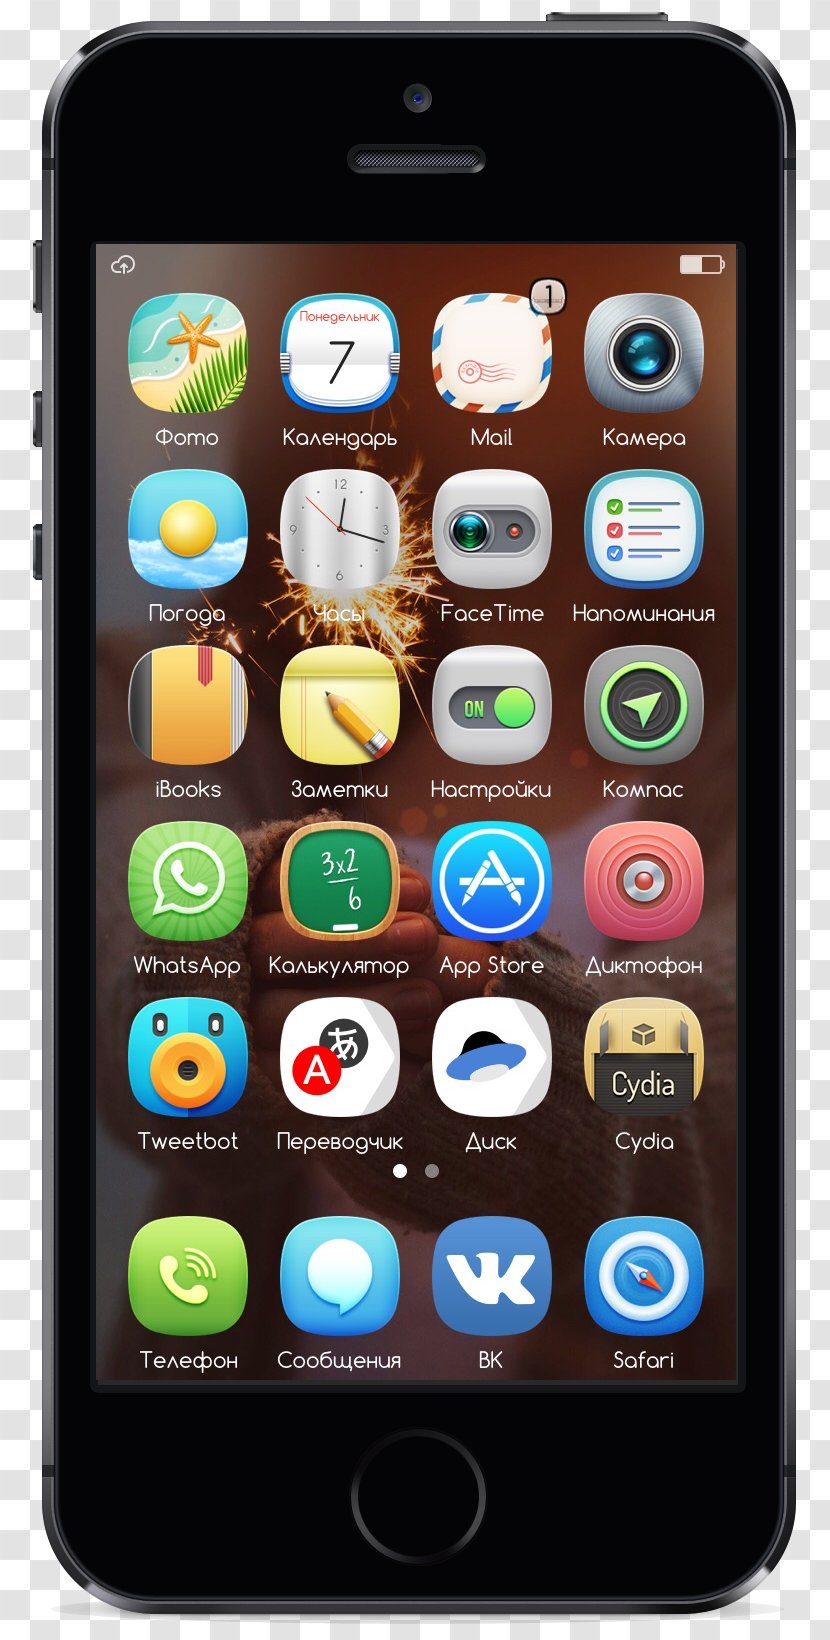 Feature Phone Smartphone IPhone 4S Cydia - Telephone - Lasso Transparent PNG